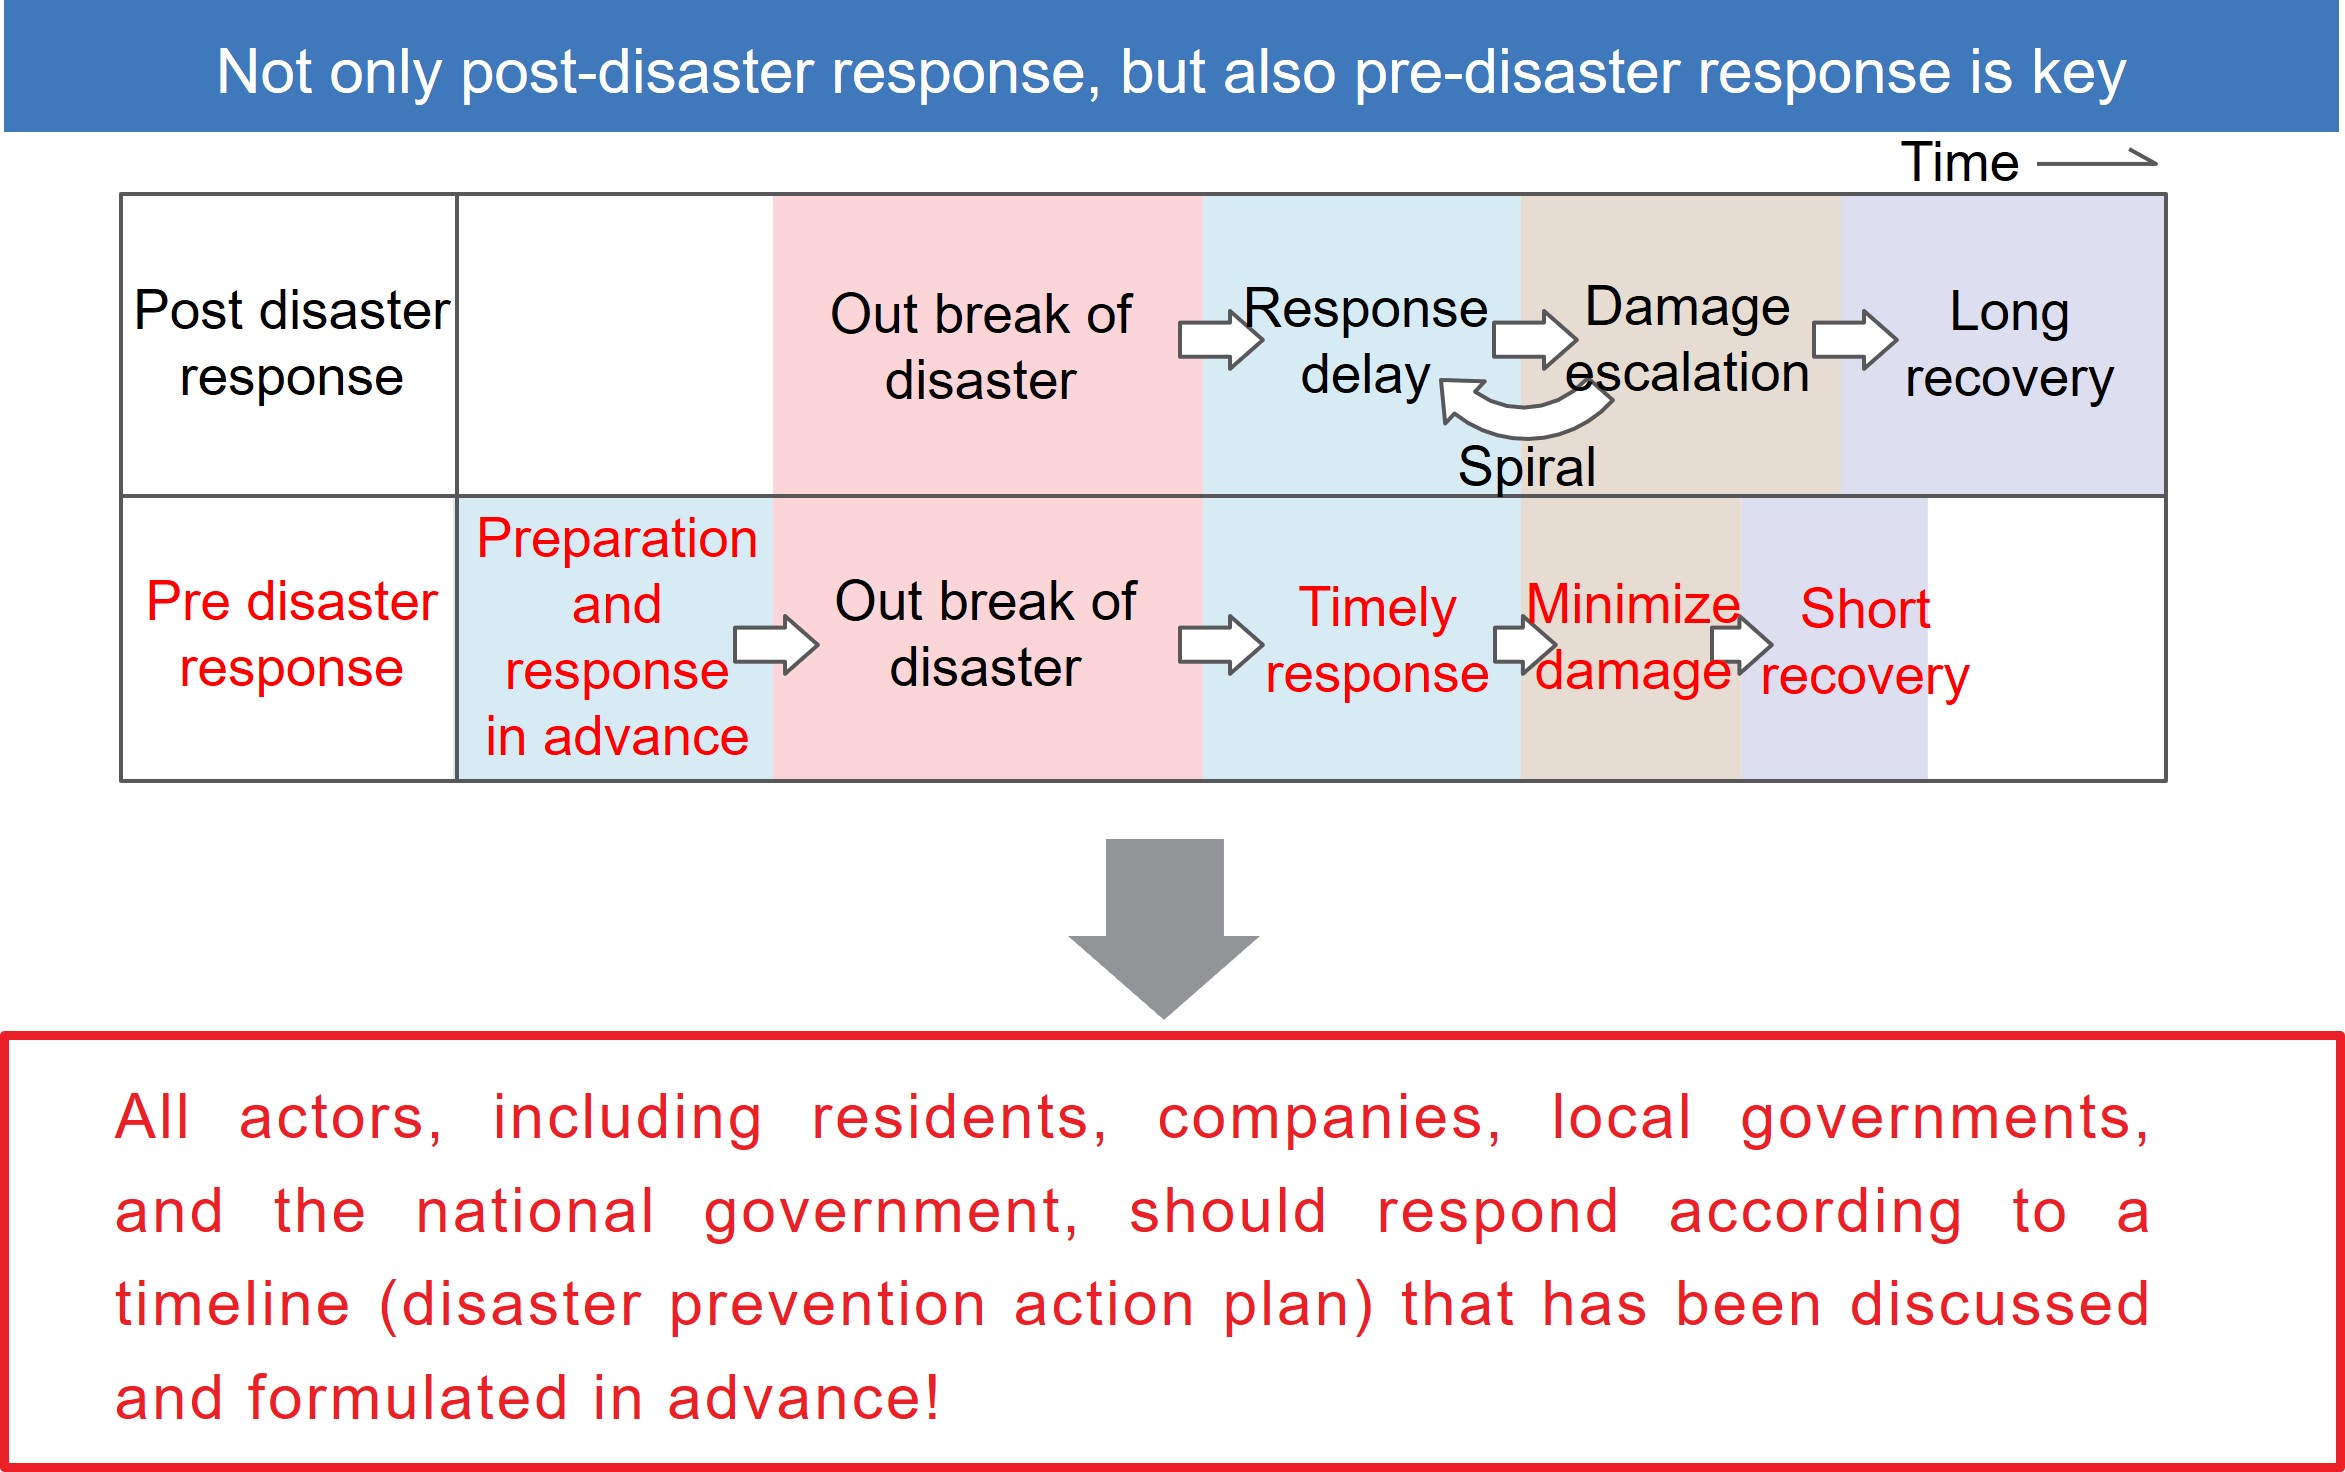 Figure 3.2.2.2. Importance of the pre-disaster response